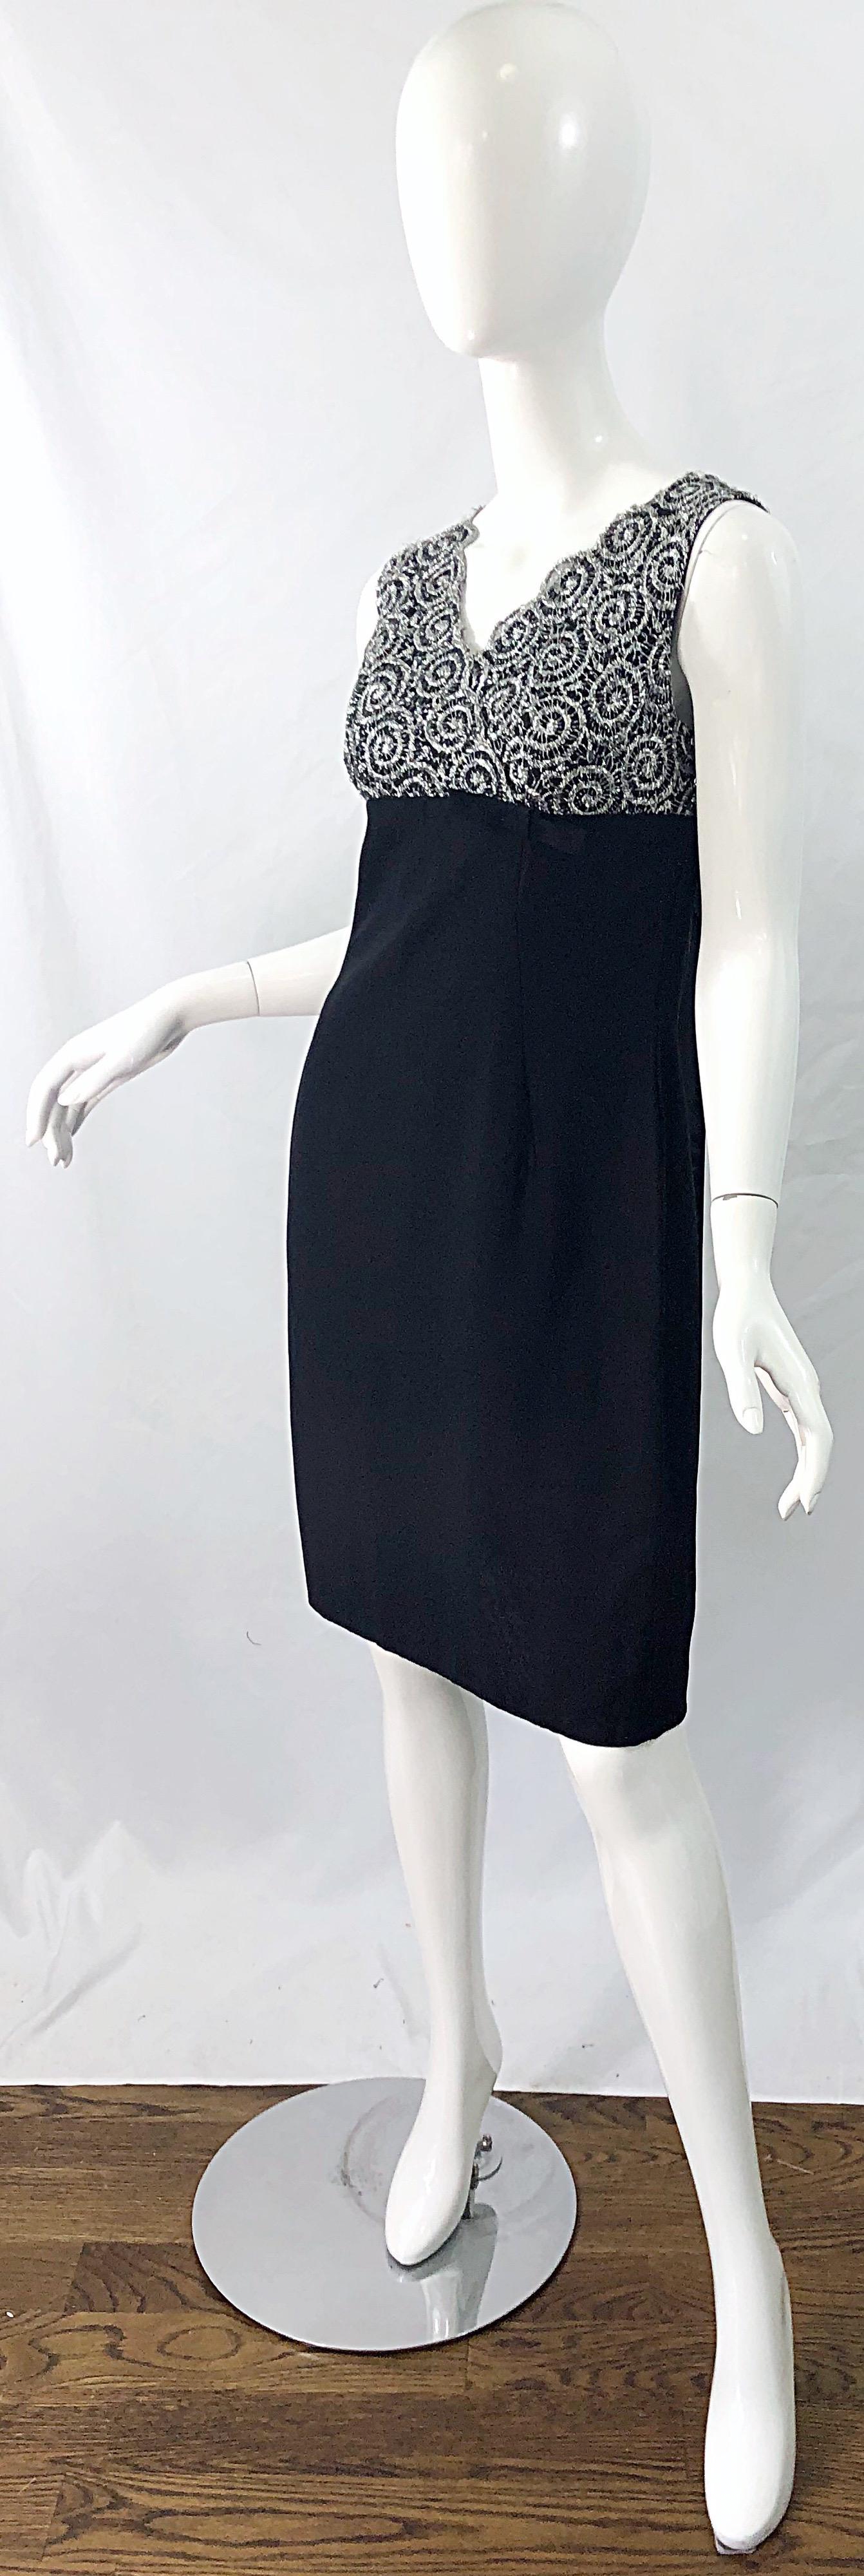 Chic 1960s Black and Silver Metallic Lace Rayon Crepe Vintage 60s Sheath Dress For Sale 2